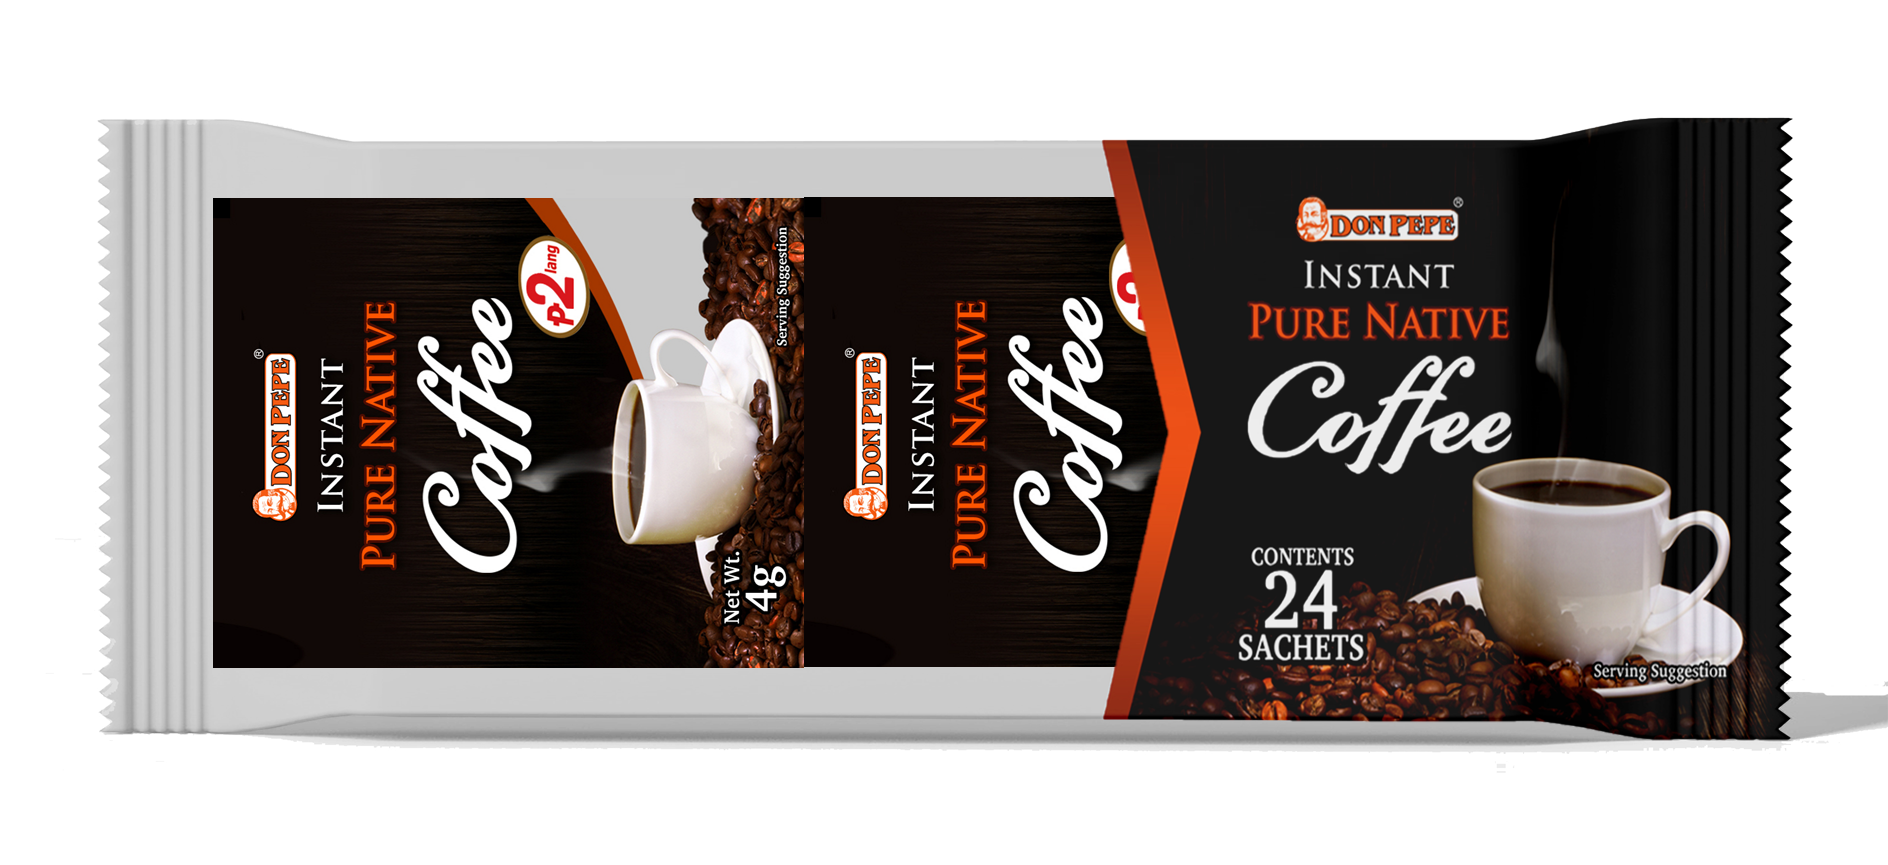 Don Pepe Instant Pure Native Coffee